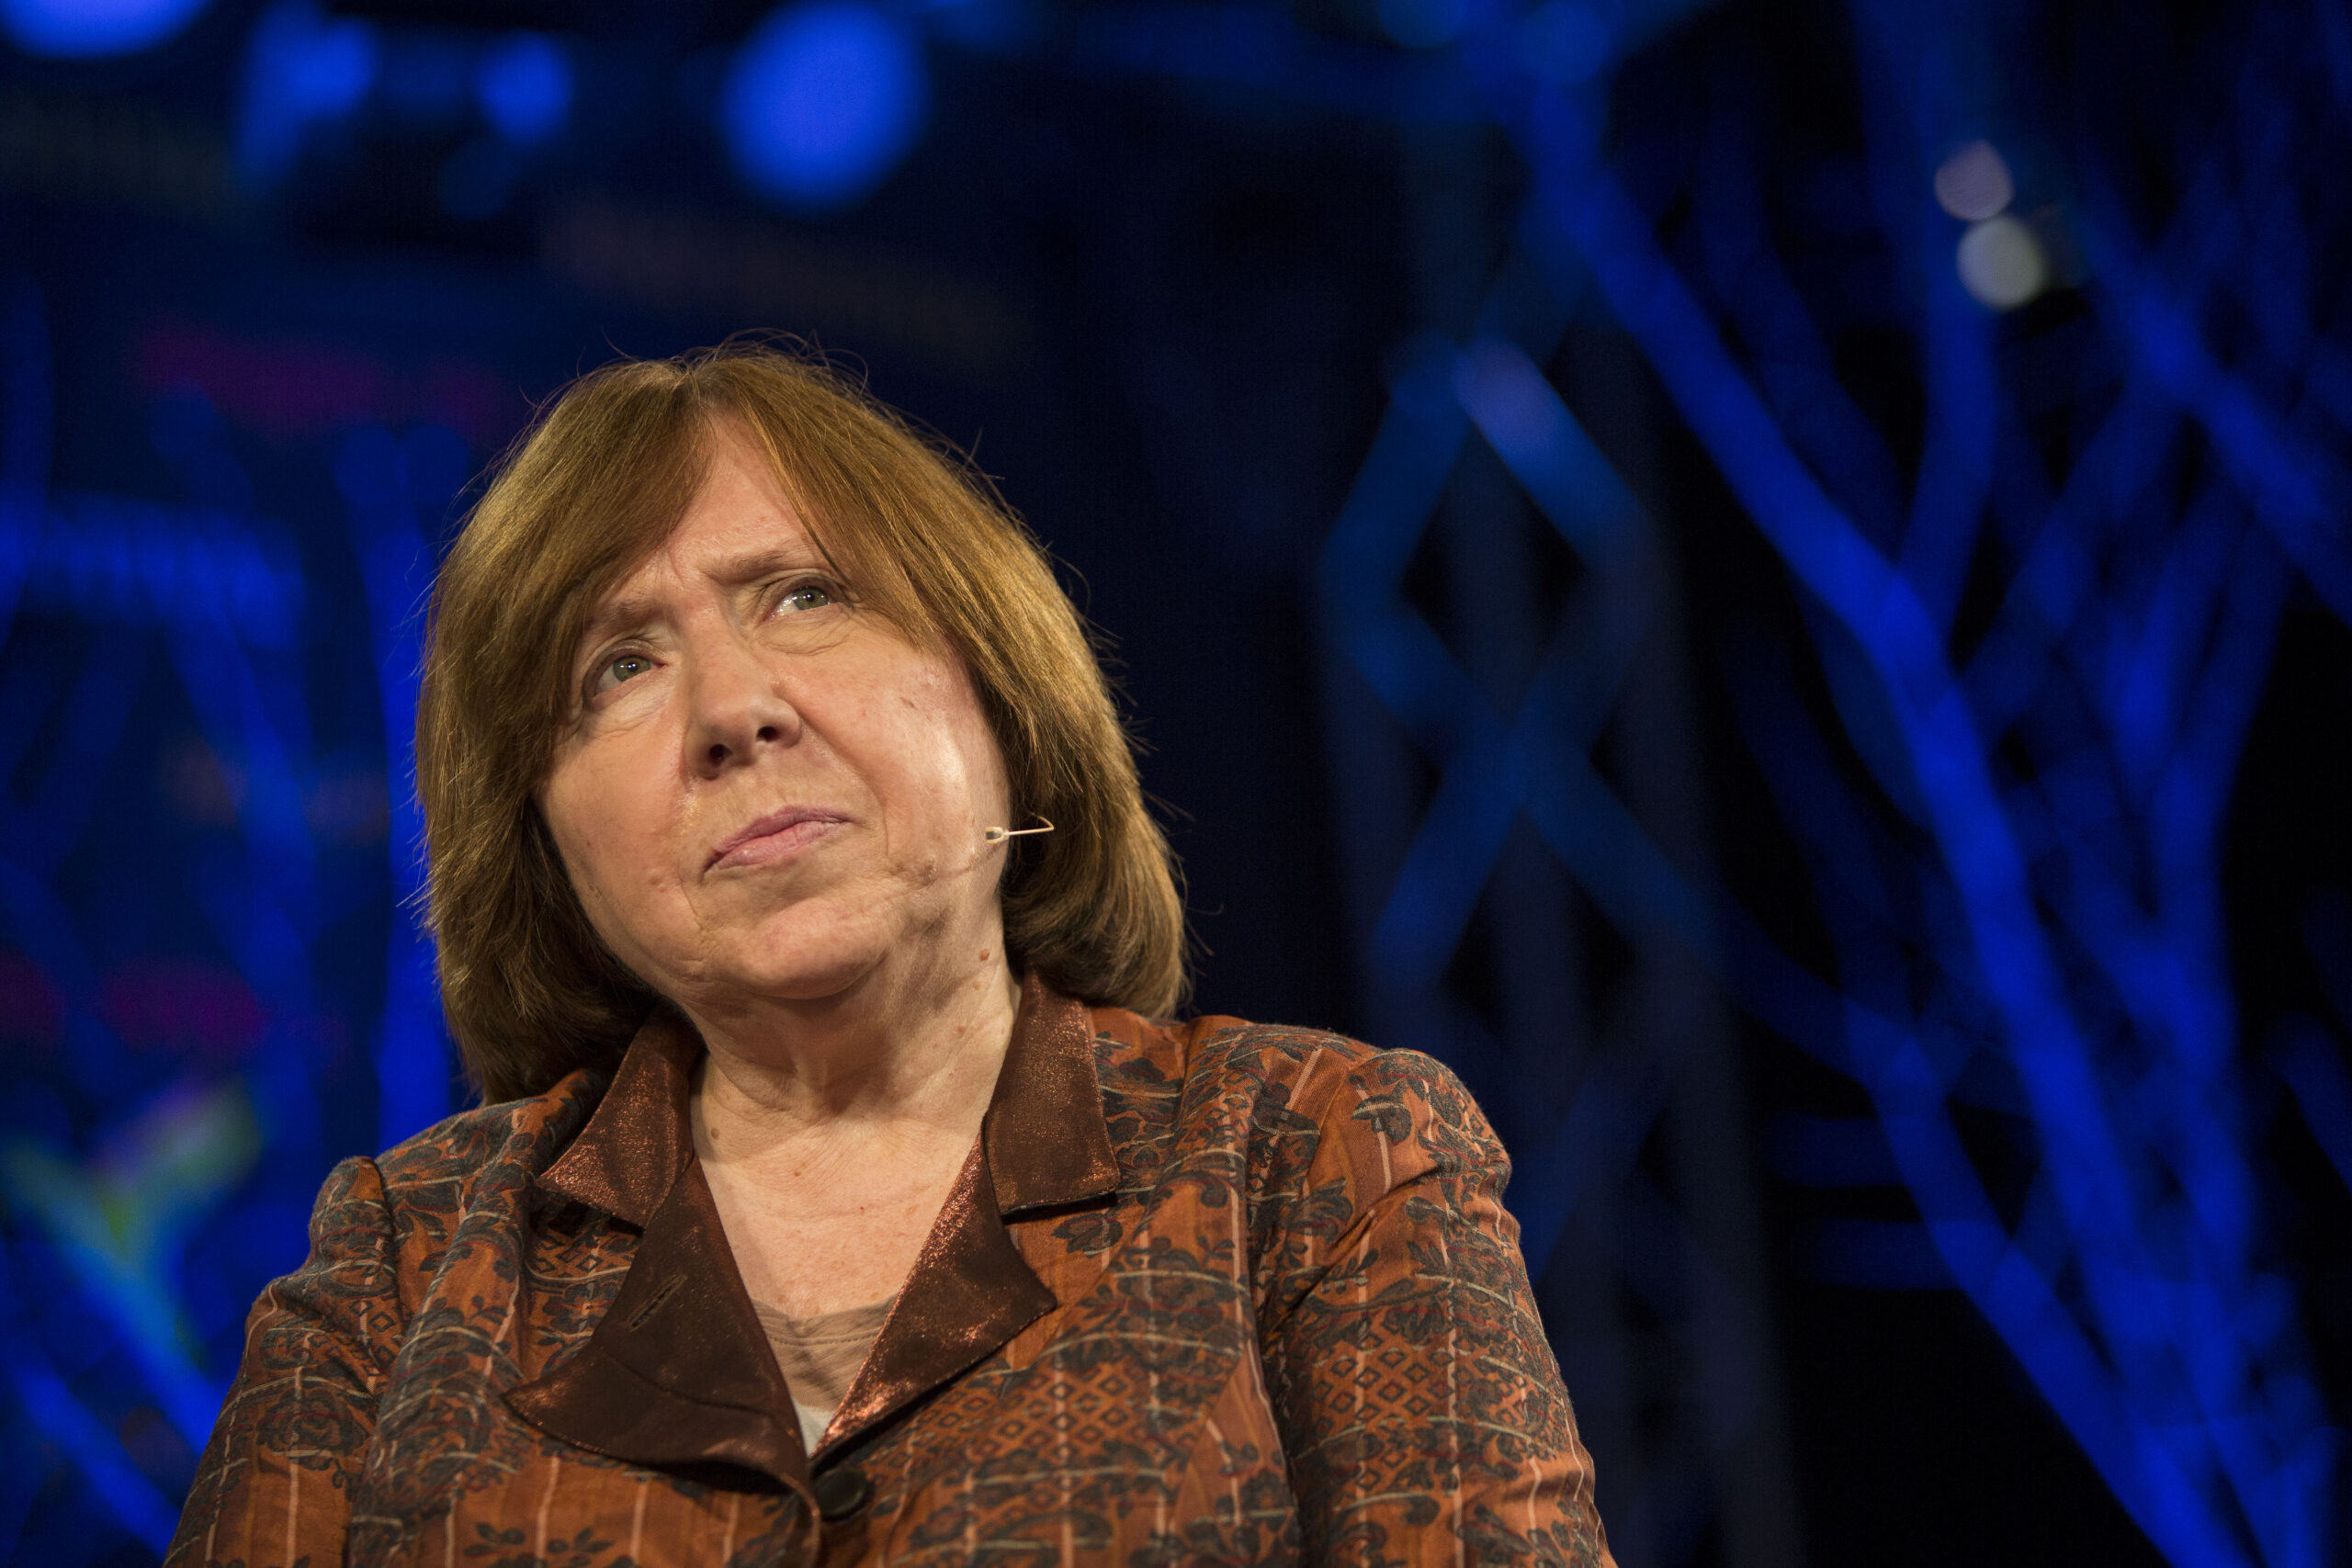 “We Will Live in a Completely Different World”: A Conversation With Svetlana Alexievich